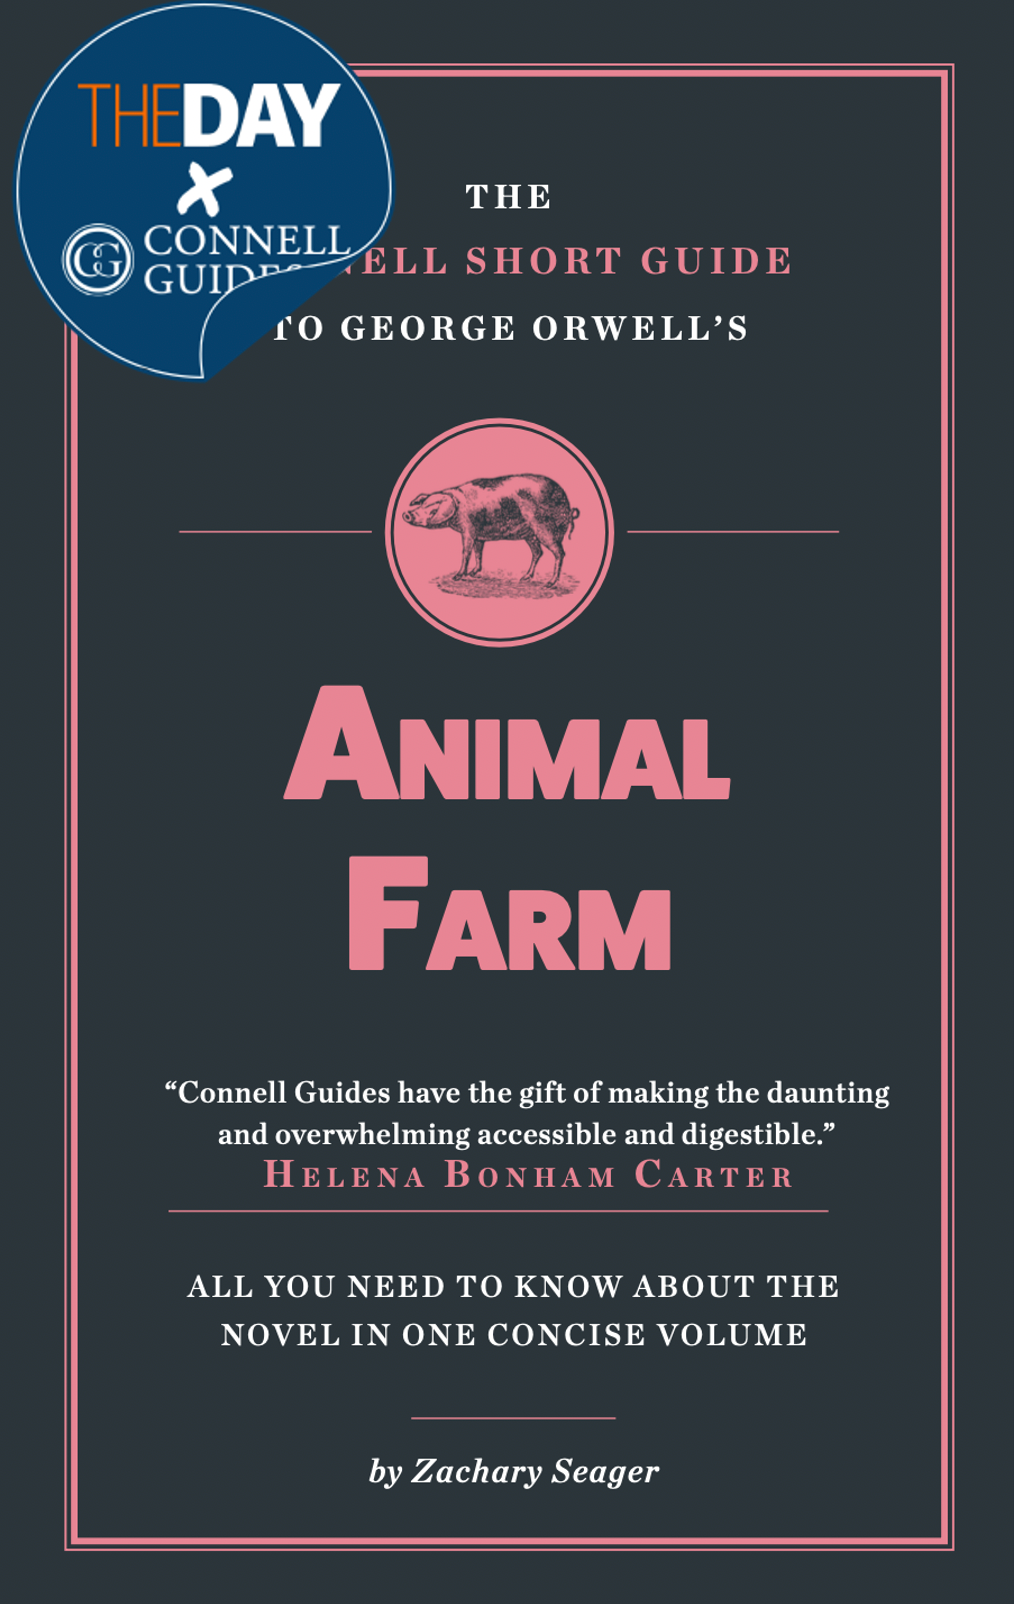 The Day x Connell Guides - The Connell Guide to George Orwell's Animal Farm